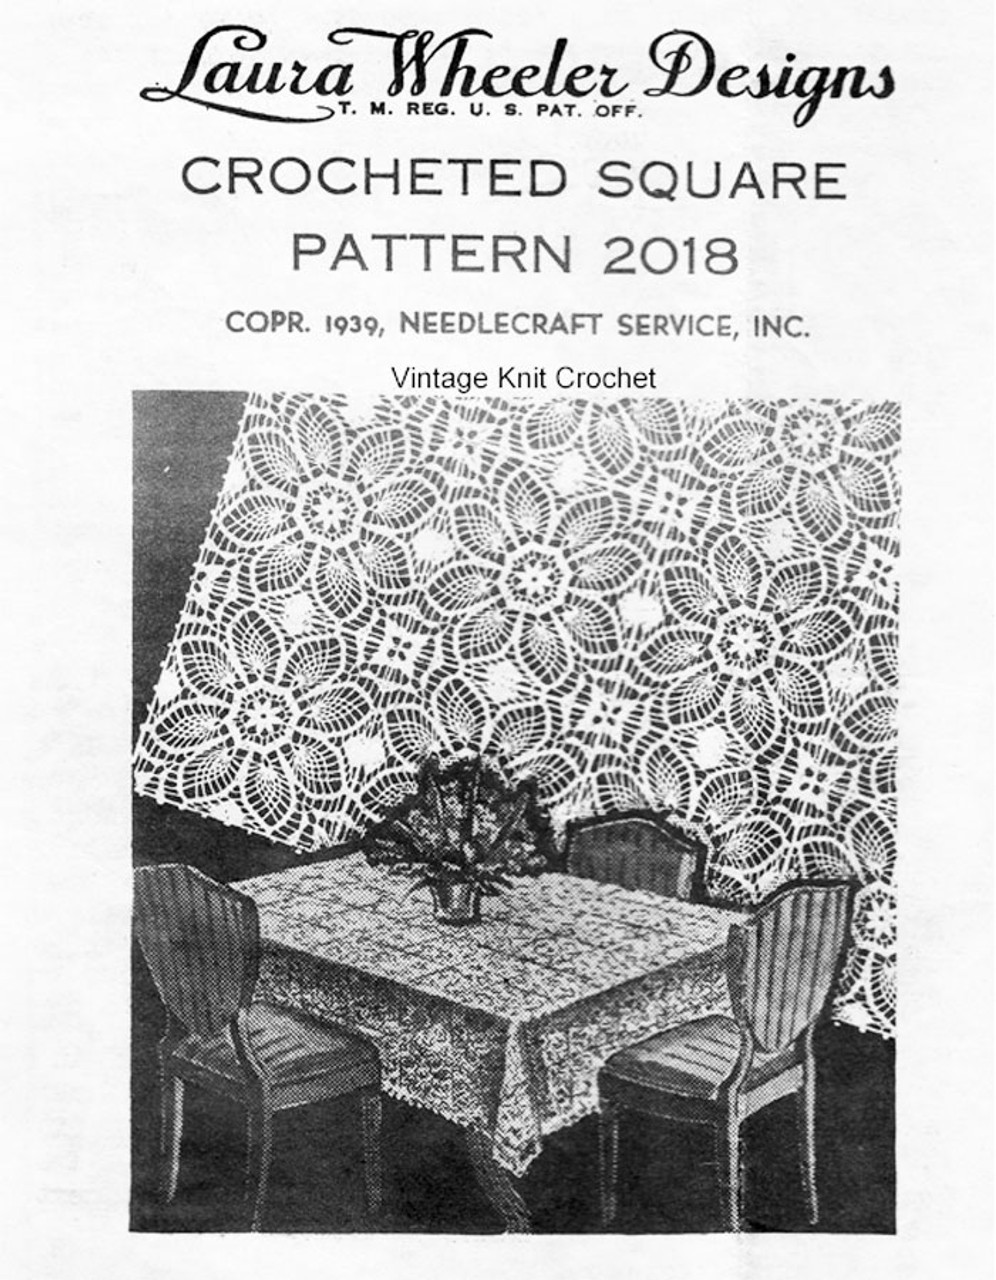 Pineapple Crochet Tablecloth Pattern, Mail Order Design 2018